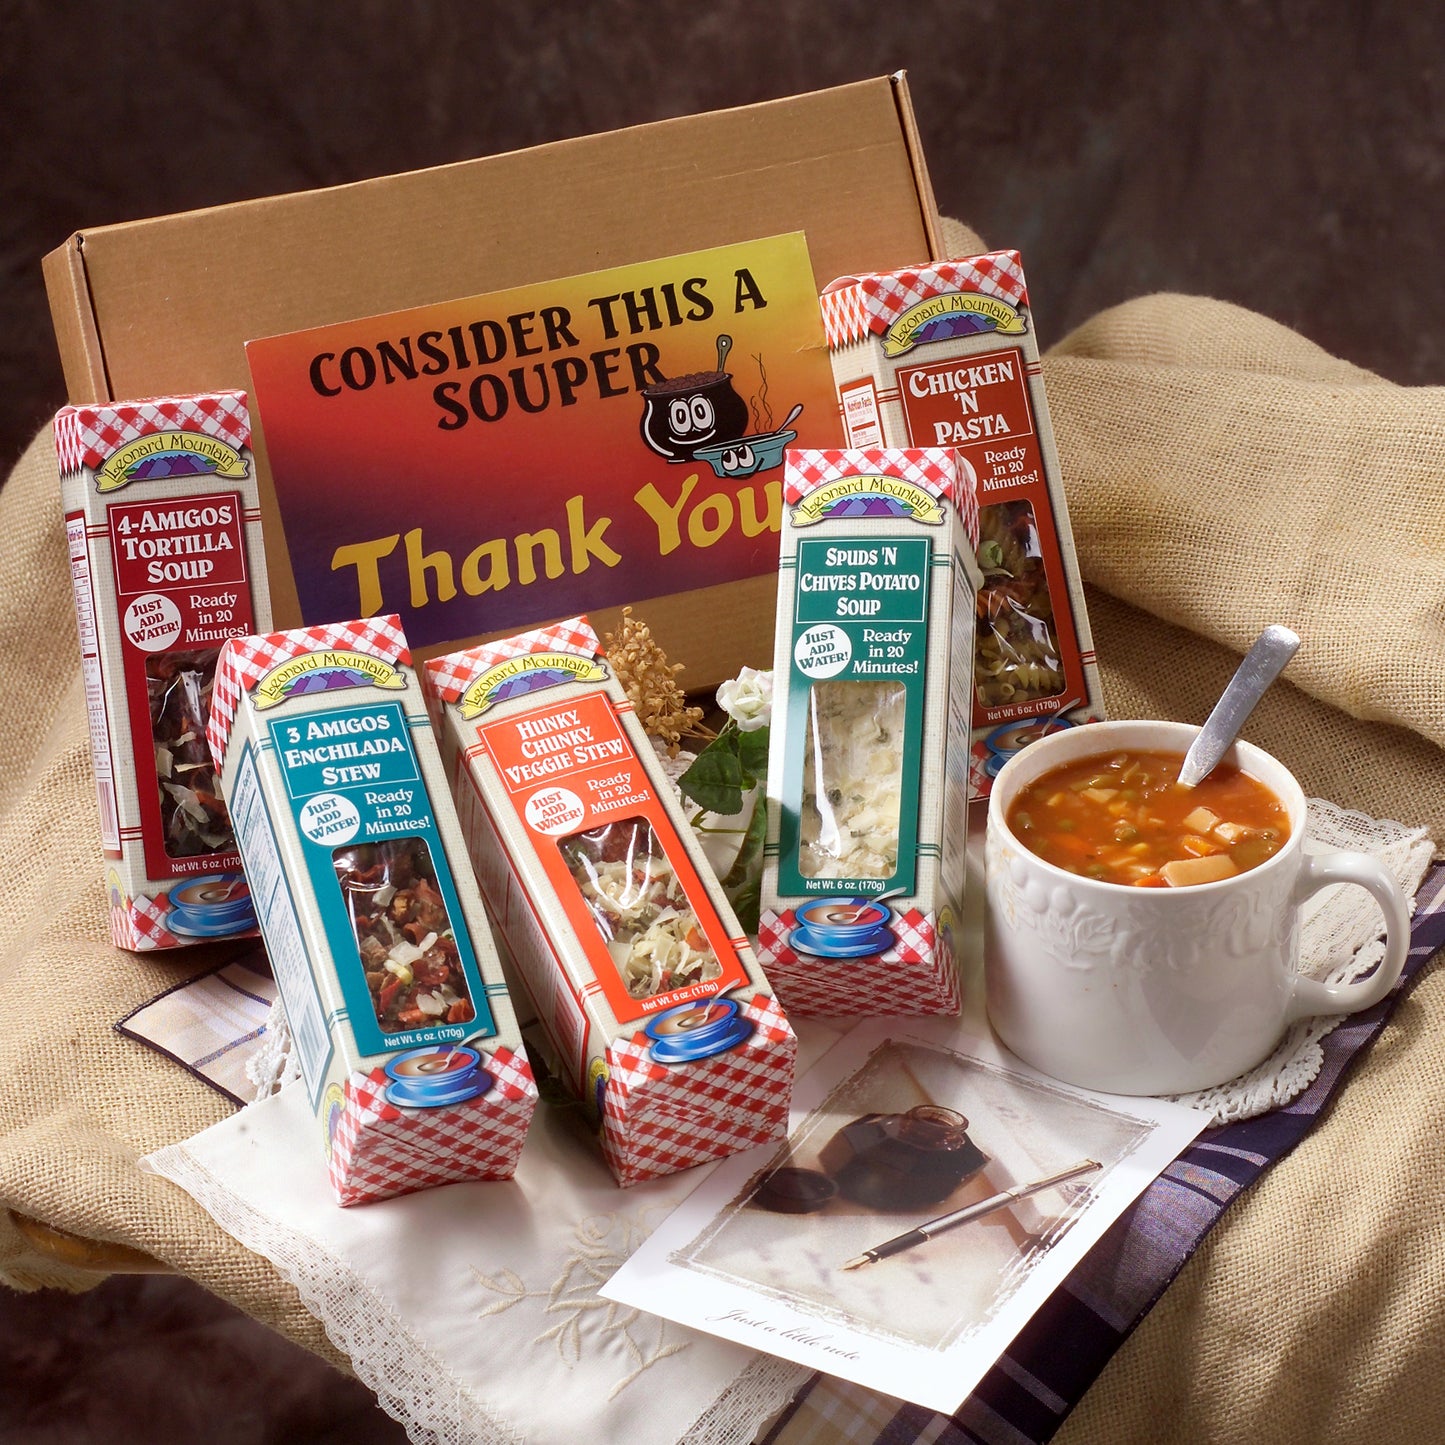 "Consider this a Souper Thank You" 5 Pack Gift Box *NEW LOWER PRICE!*